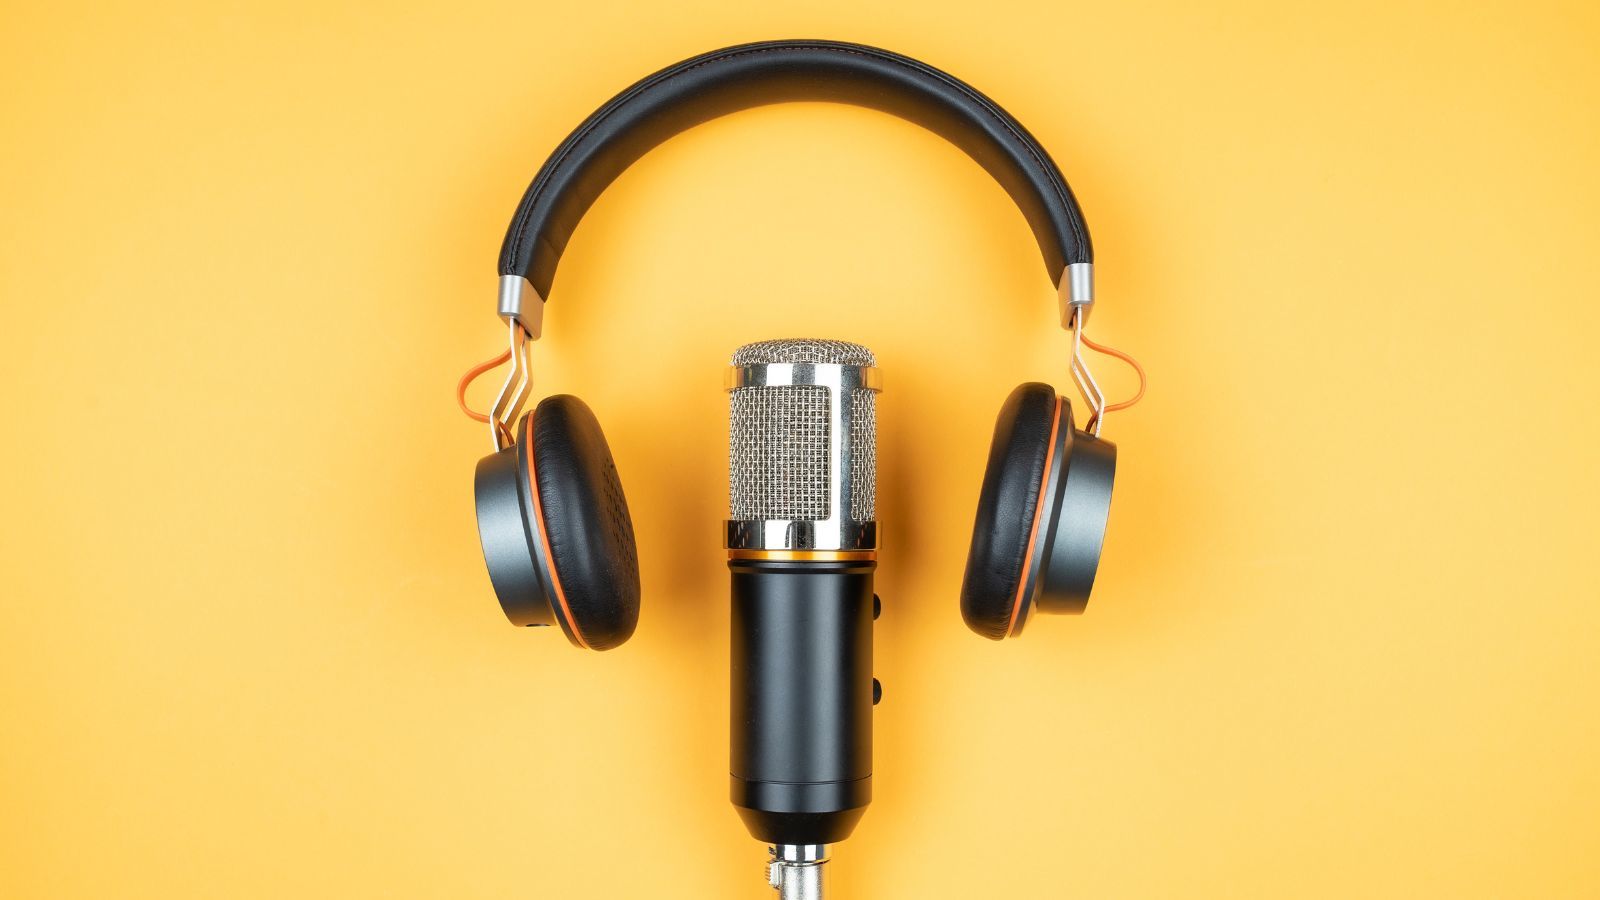 ðŸŽ§ AWS-to-go: Podcast series to get started with AWS